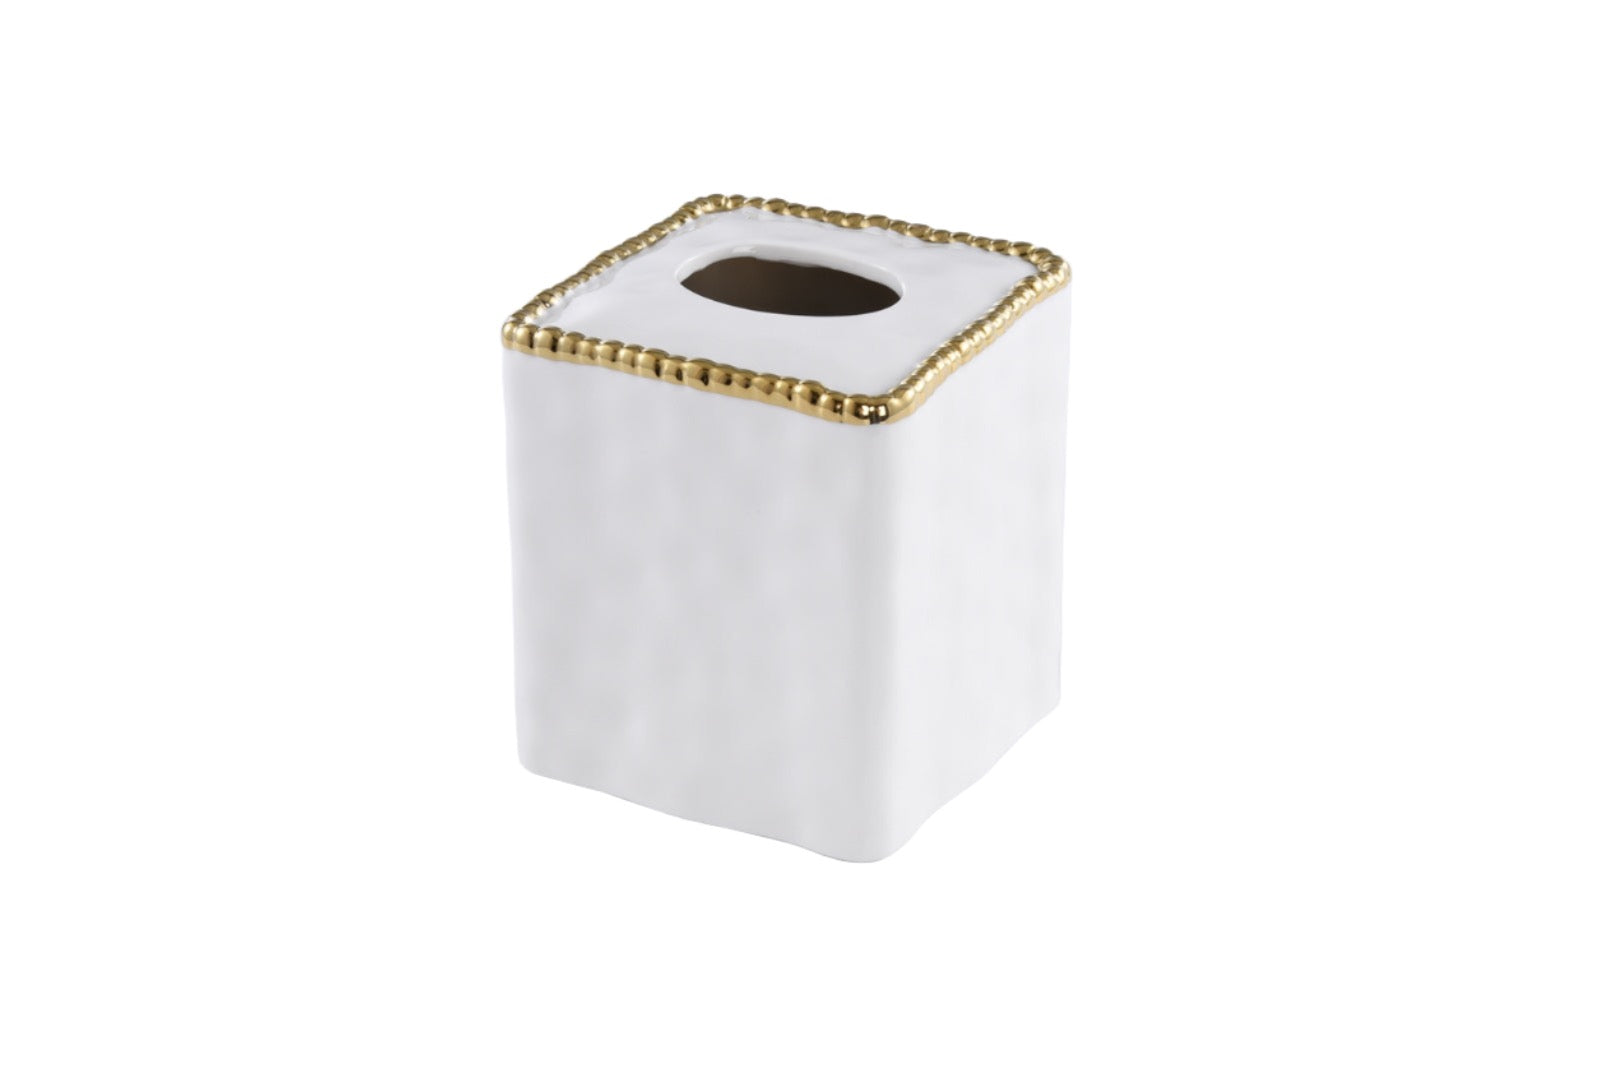 Pampa Bay Square Tissue Box With Gold Beads